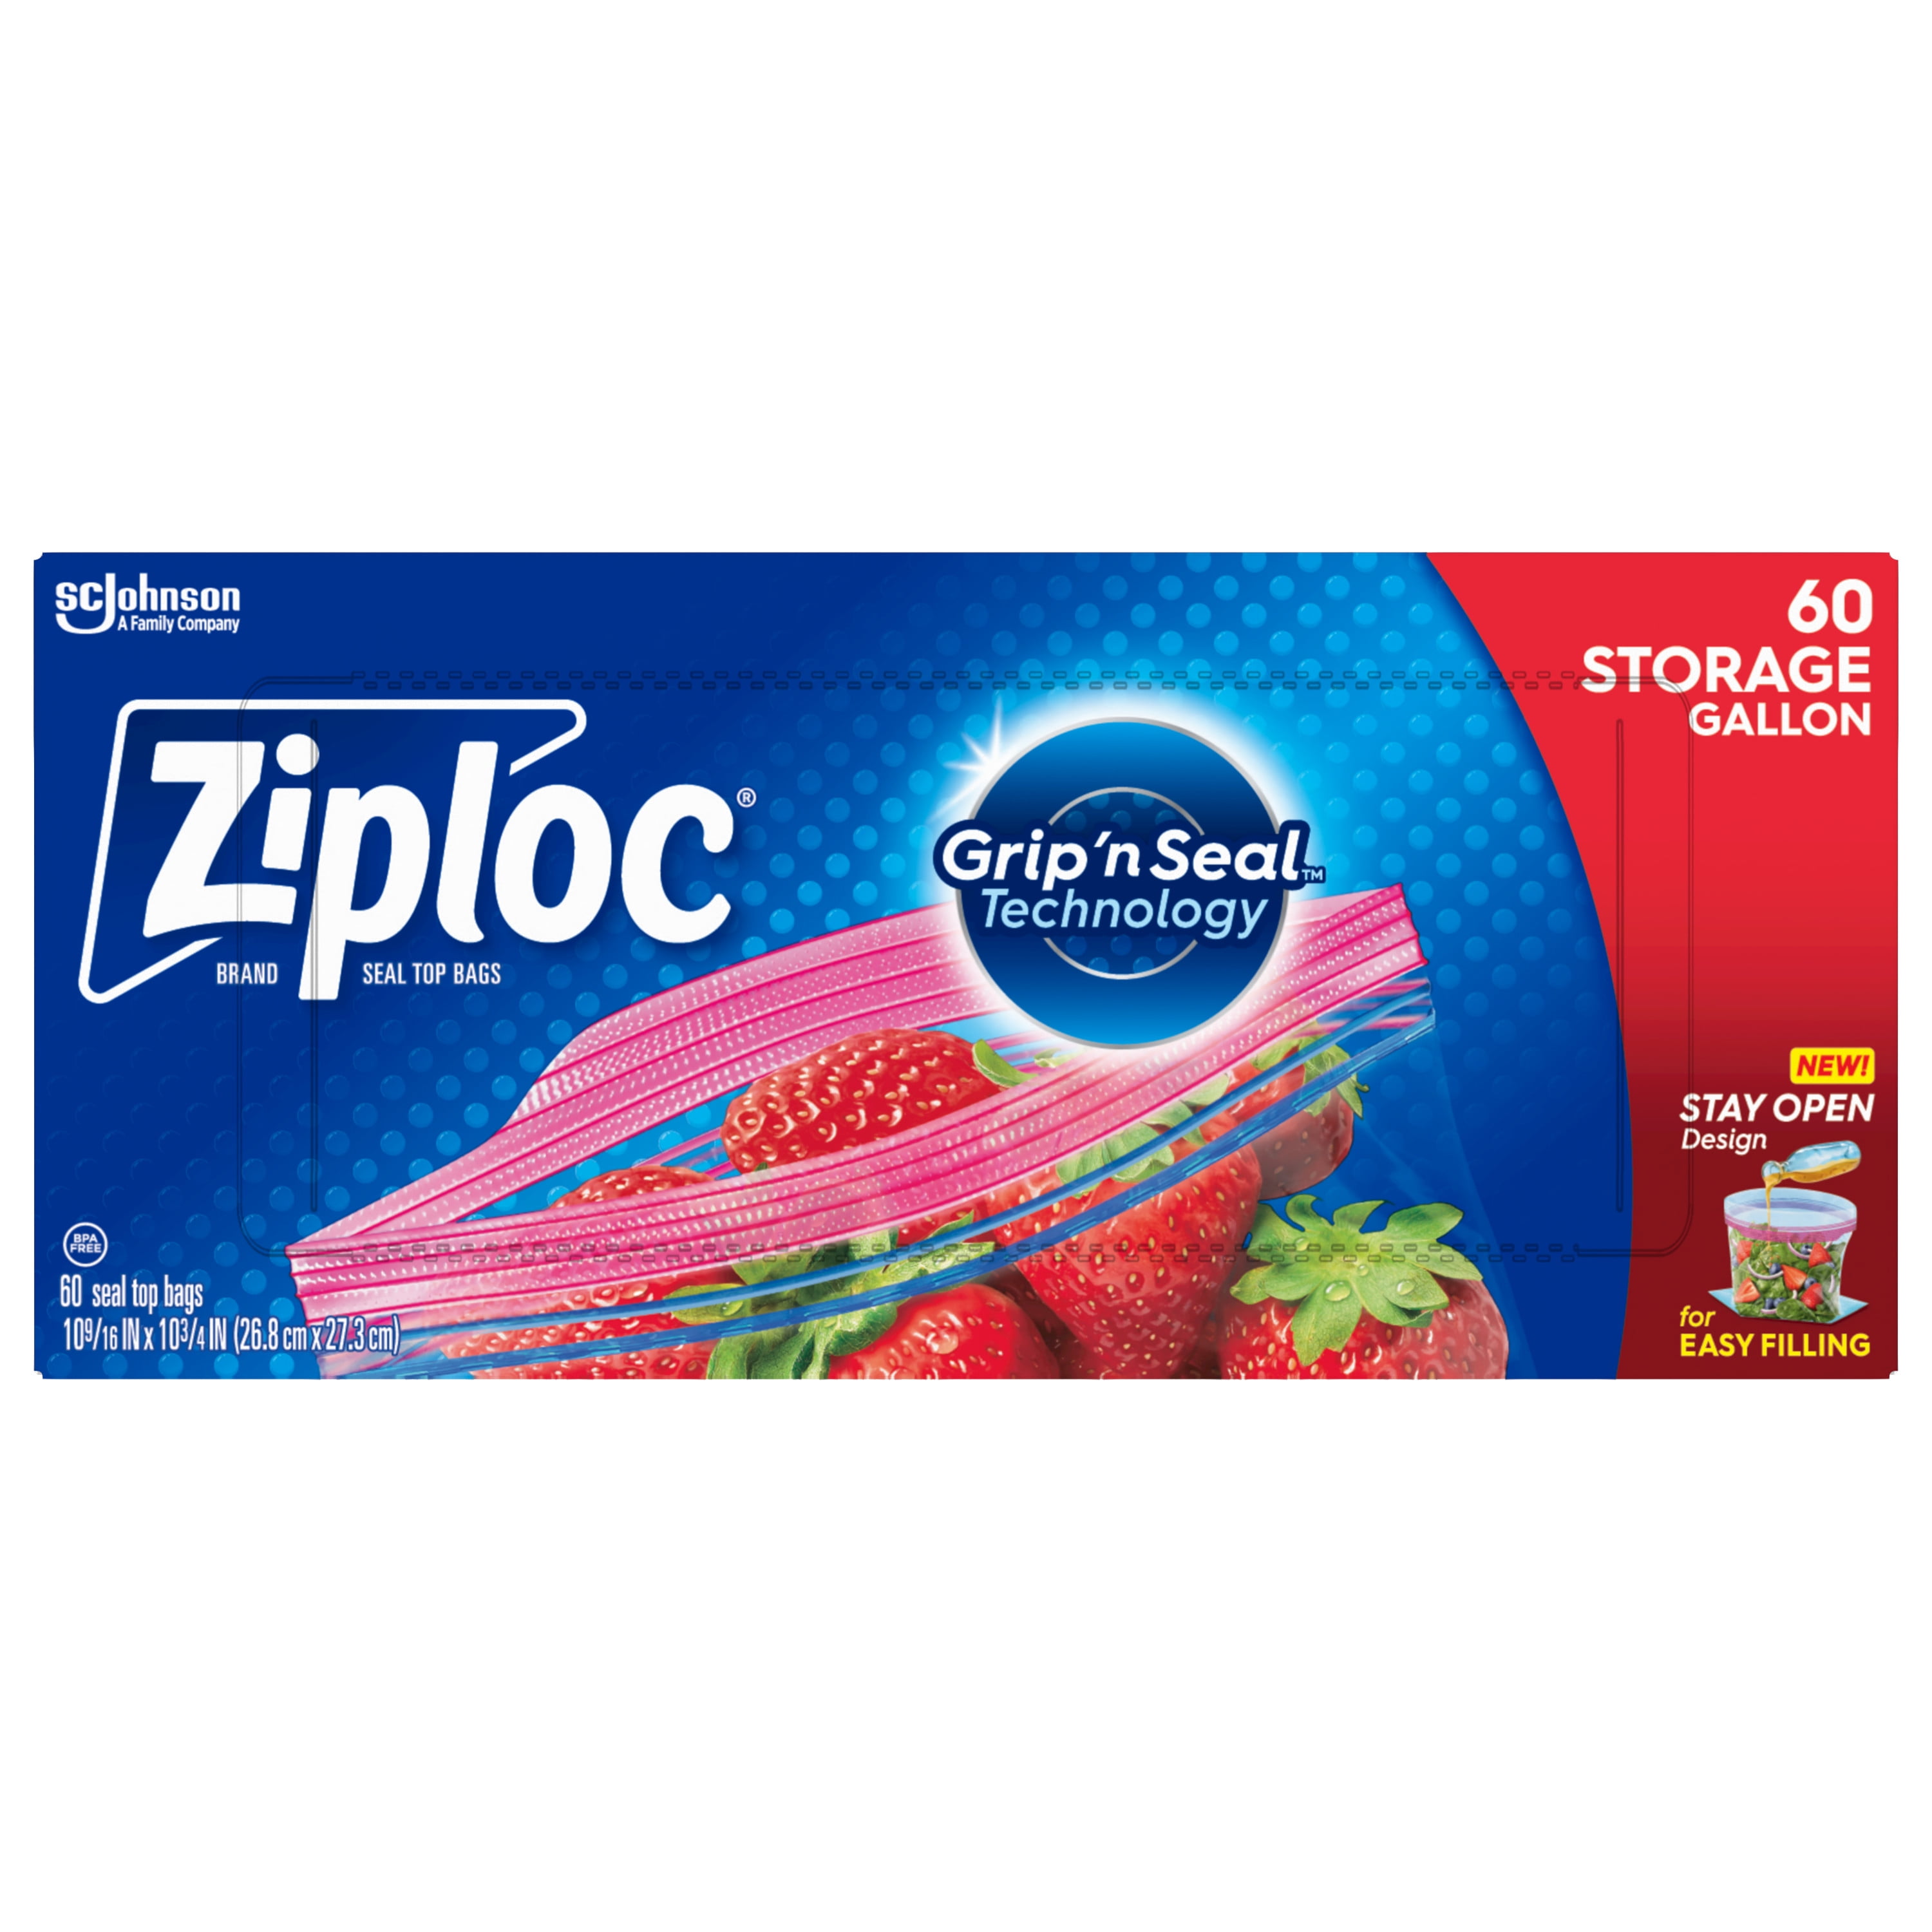 Ziploc 1 Gallon Family Pack Storage Bags, 42 Count 